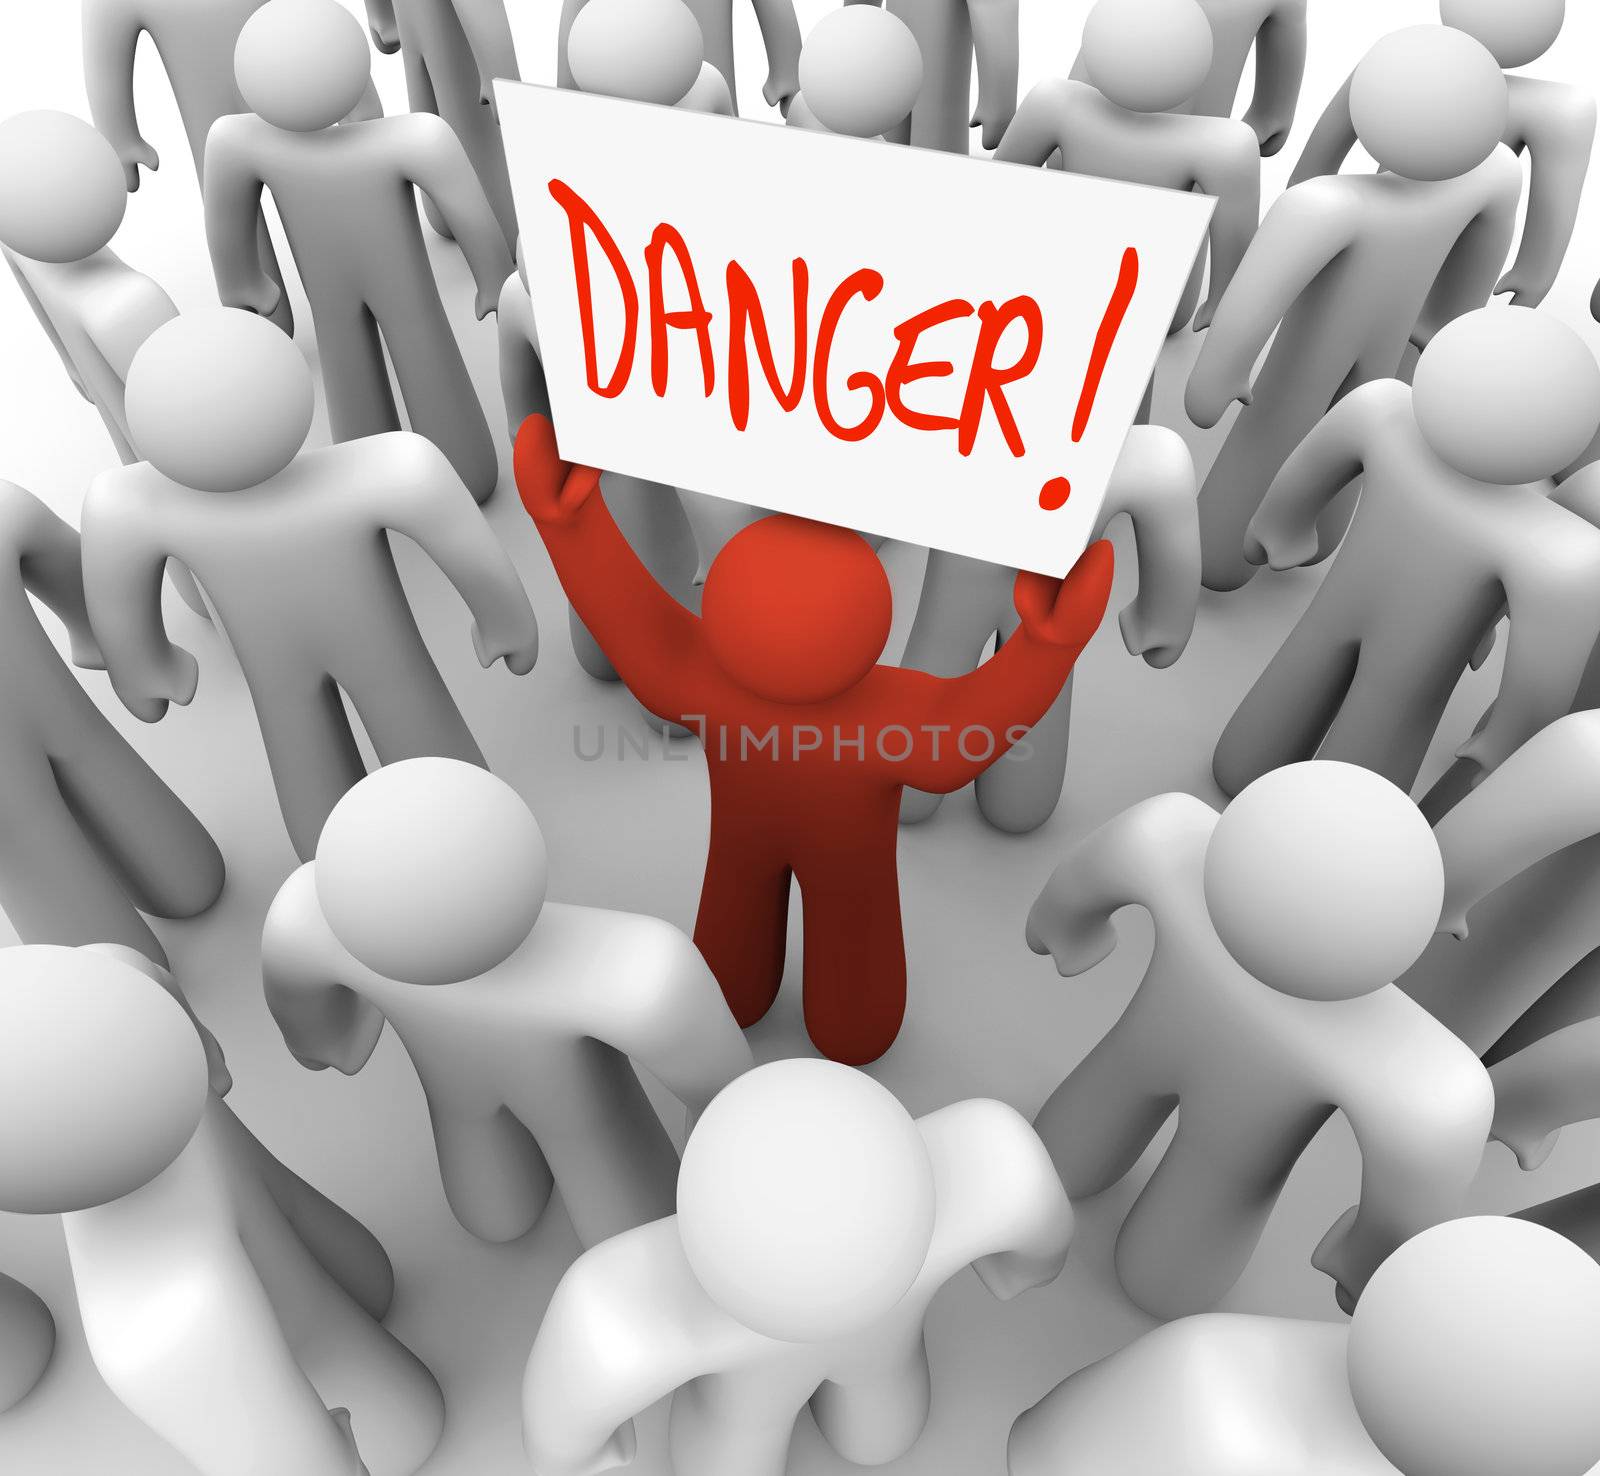 A red person stands out in a crowd holding a sign that reads Danger to warn and alert other people to a risk, hazard or other dangerous condition